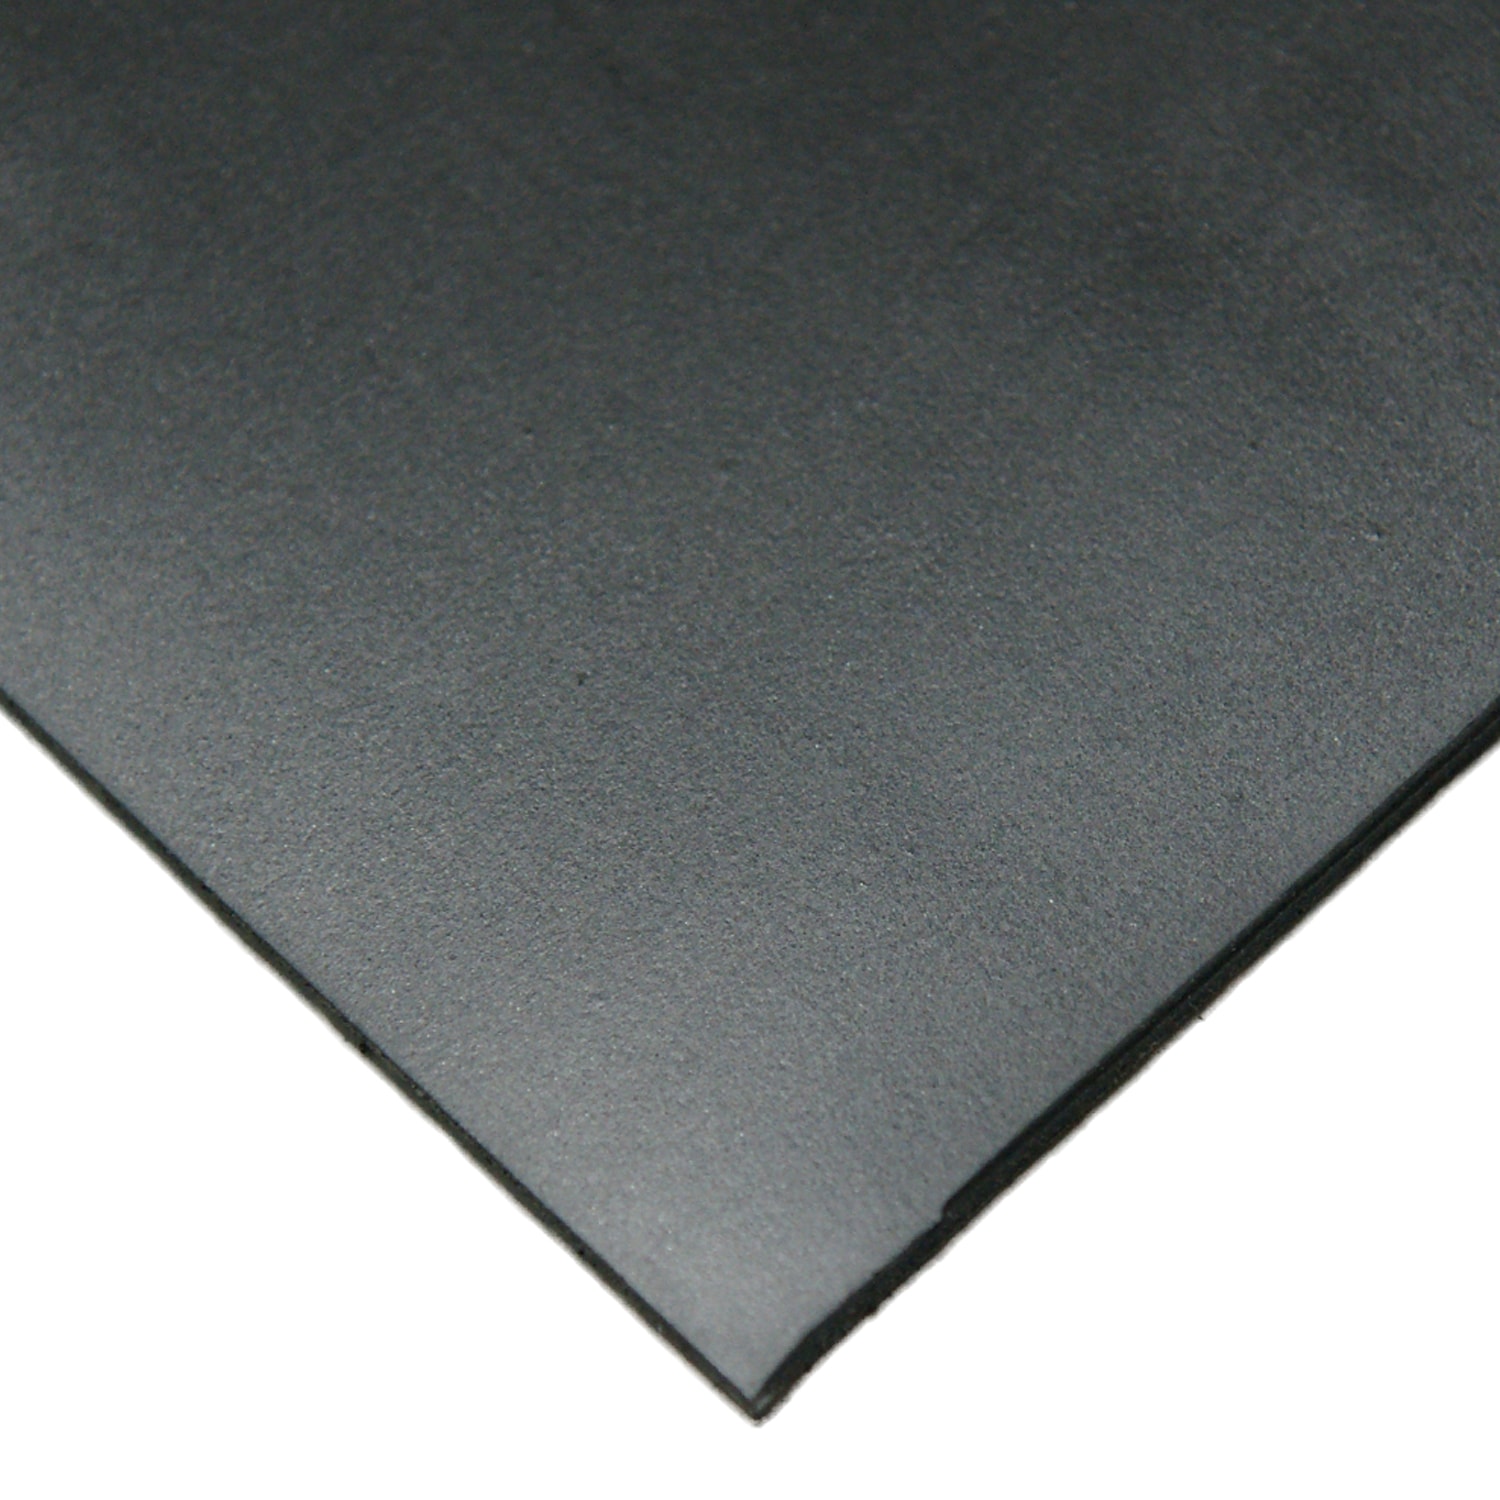 Rubber-Cal General-purpose Rubber 1/8-in T x 24-in W x 36-in L Black  Commercial 60A Durometer Rubber Sheet